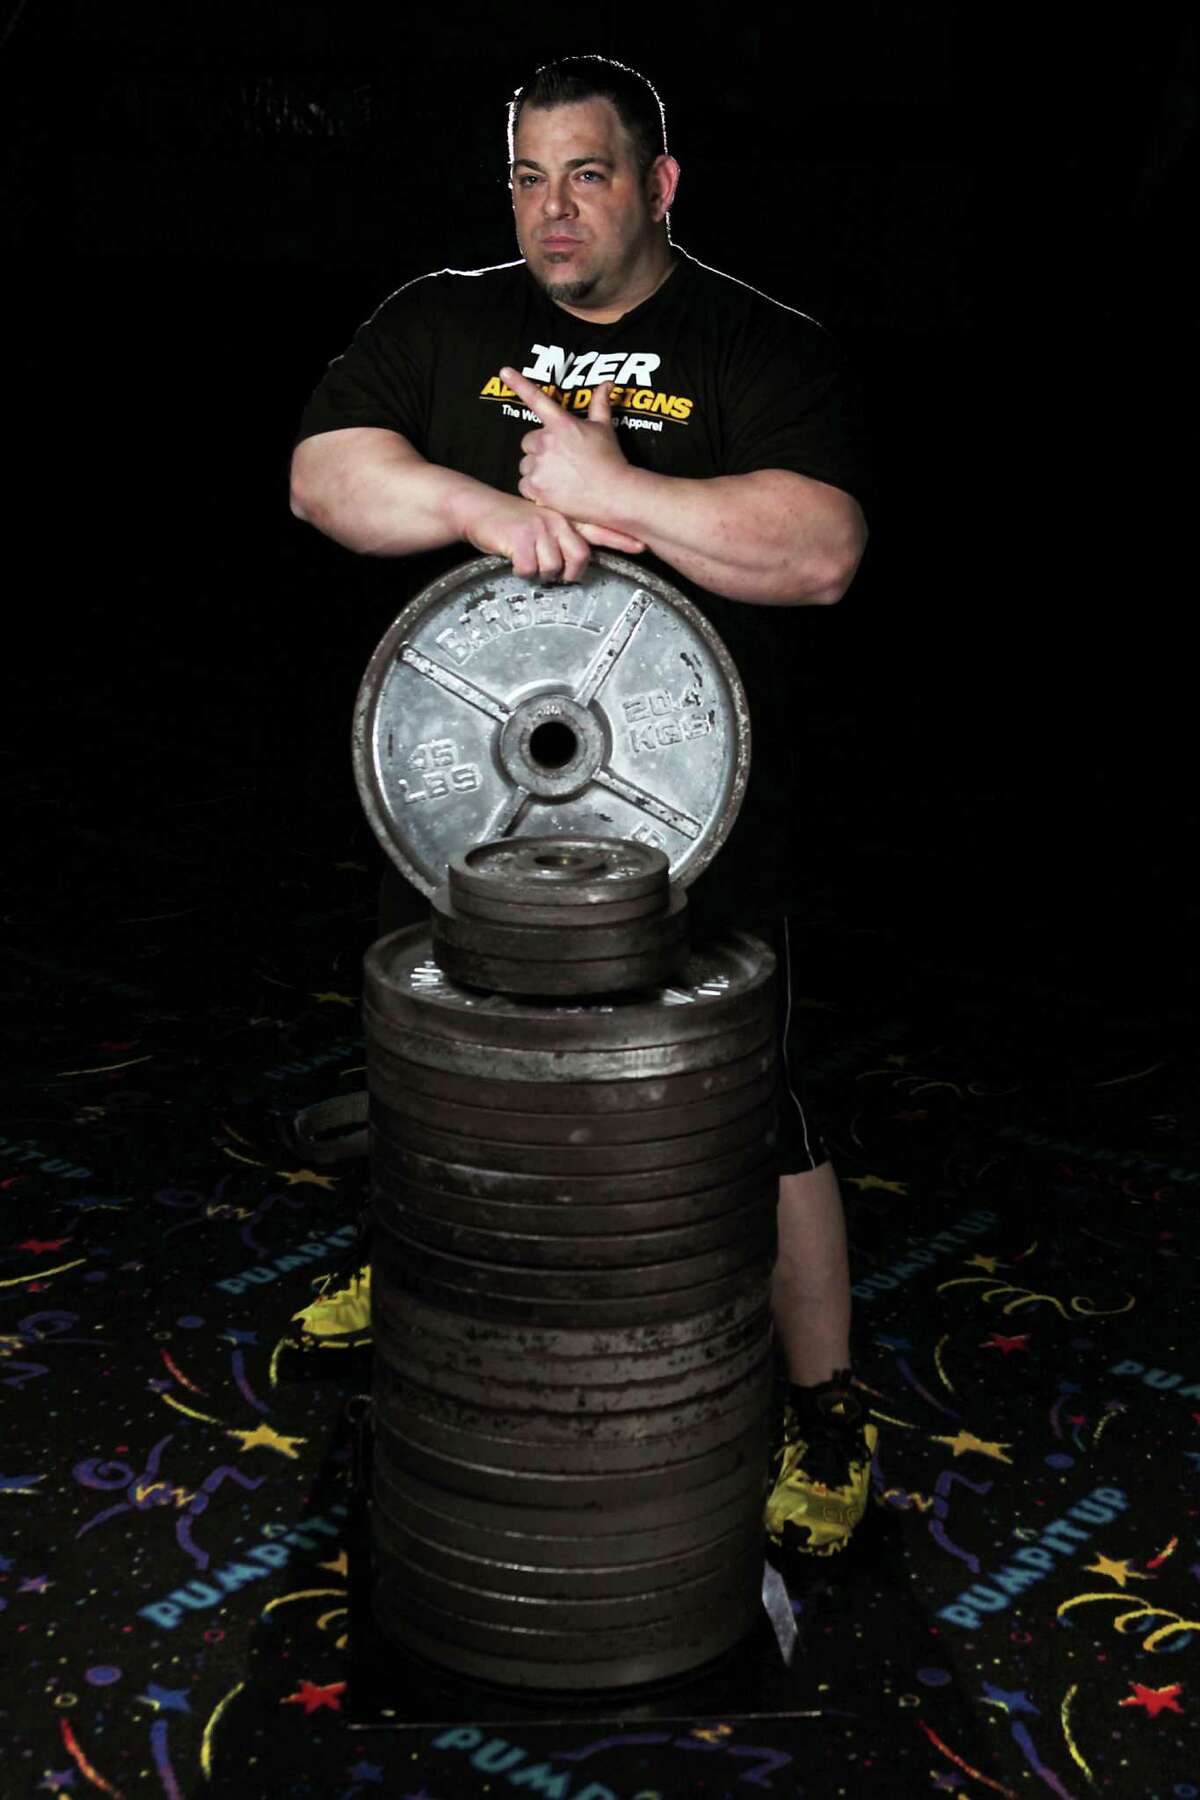 Monster Gym's Tiny Meeker who recently became the first man in the world to bench press over 1,100 pounds poses for a portrait with 1,100 pounds of weights Sunday, Jan. 12, 2014, in Kingwood.